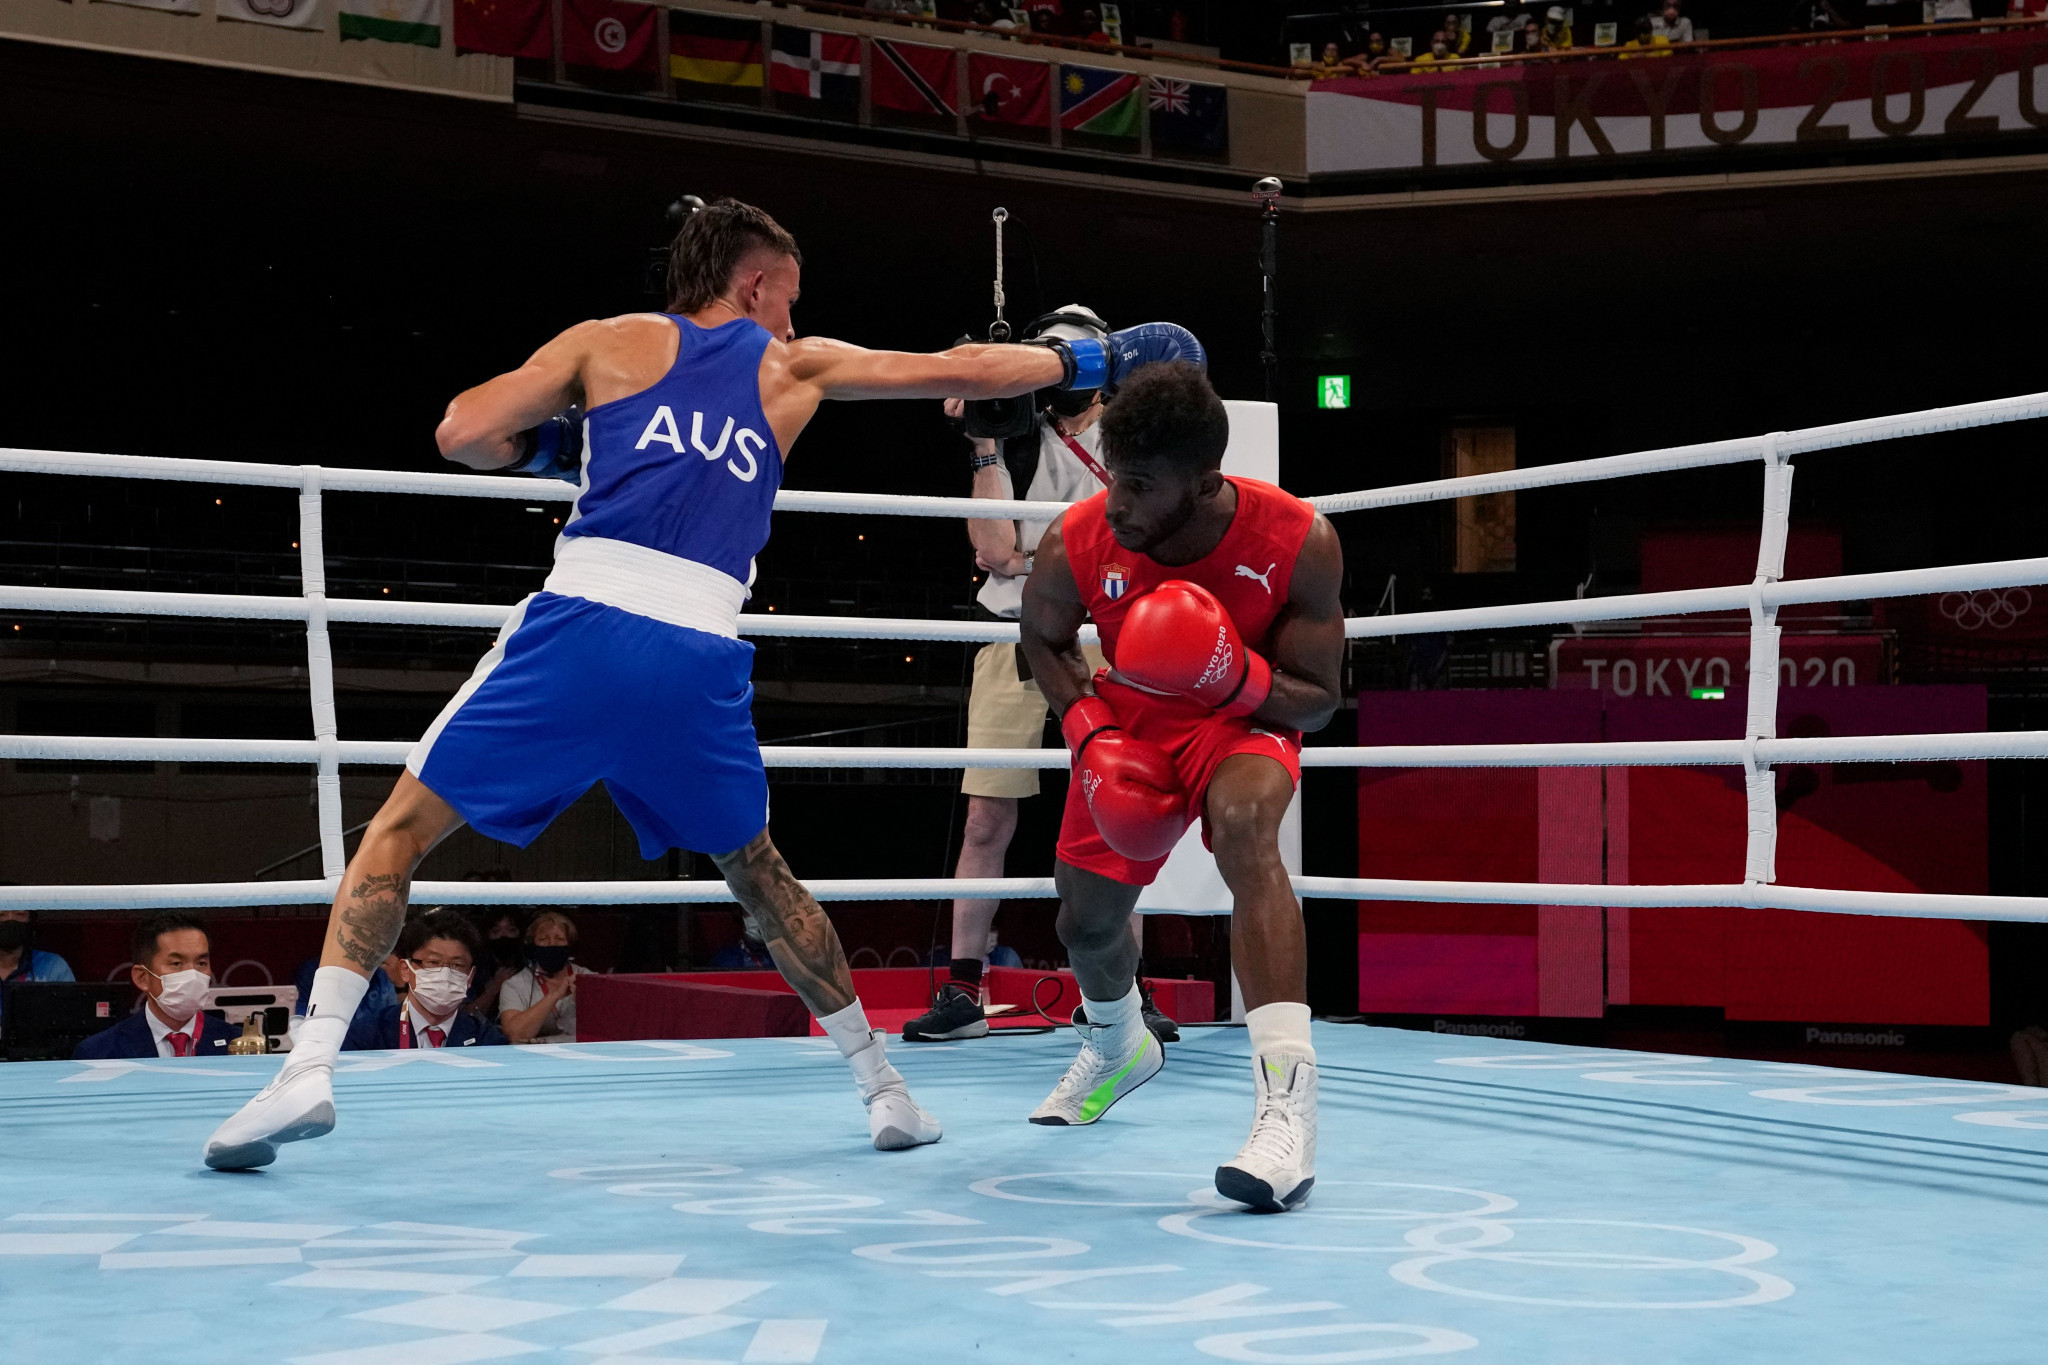 The Oceania Boxing Confederation believes "boxing deserves to be a part of the Olympics" ©Getty Images